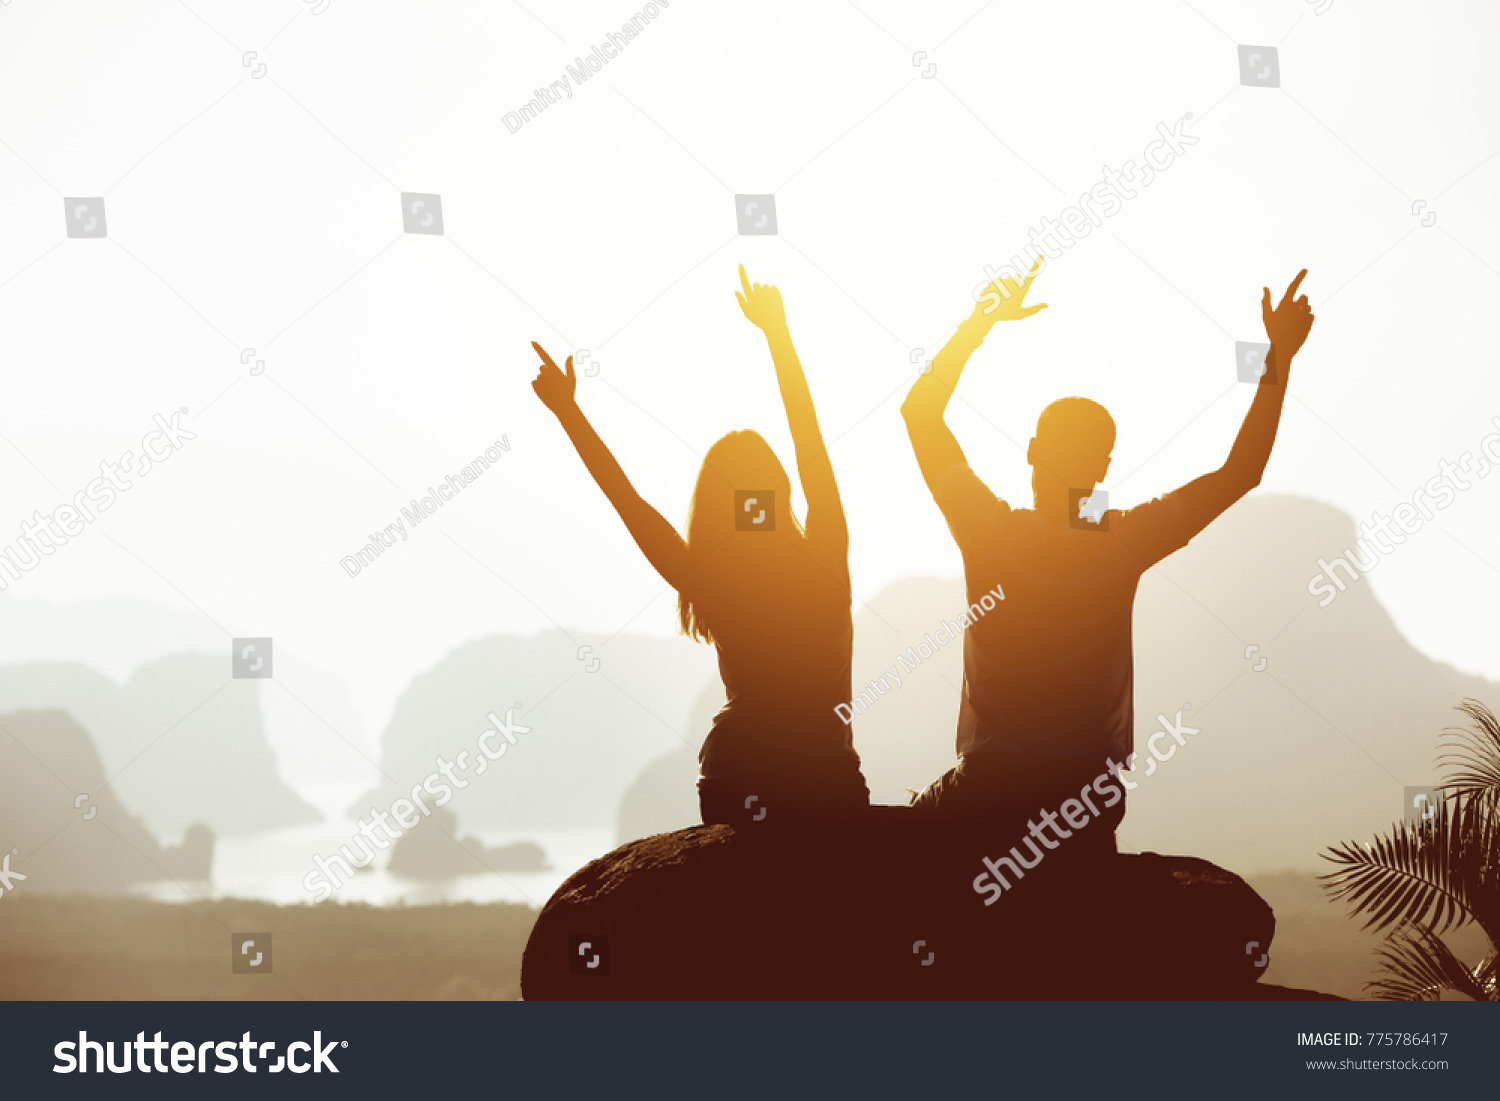 Travel concept with happy couple sitting on big rock with raised arms on mountains and islands backdrop. Place for text #775786417